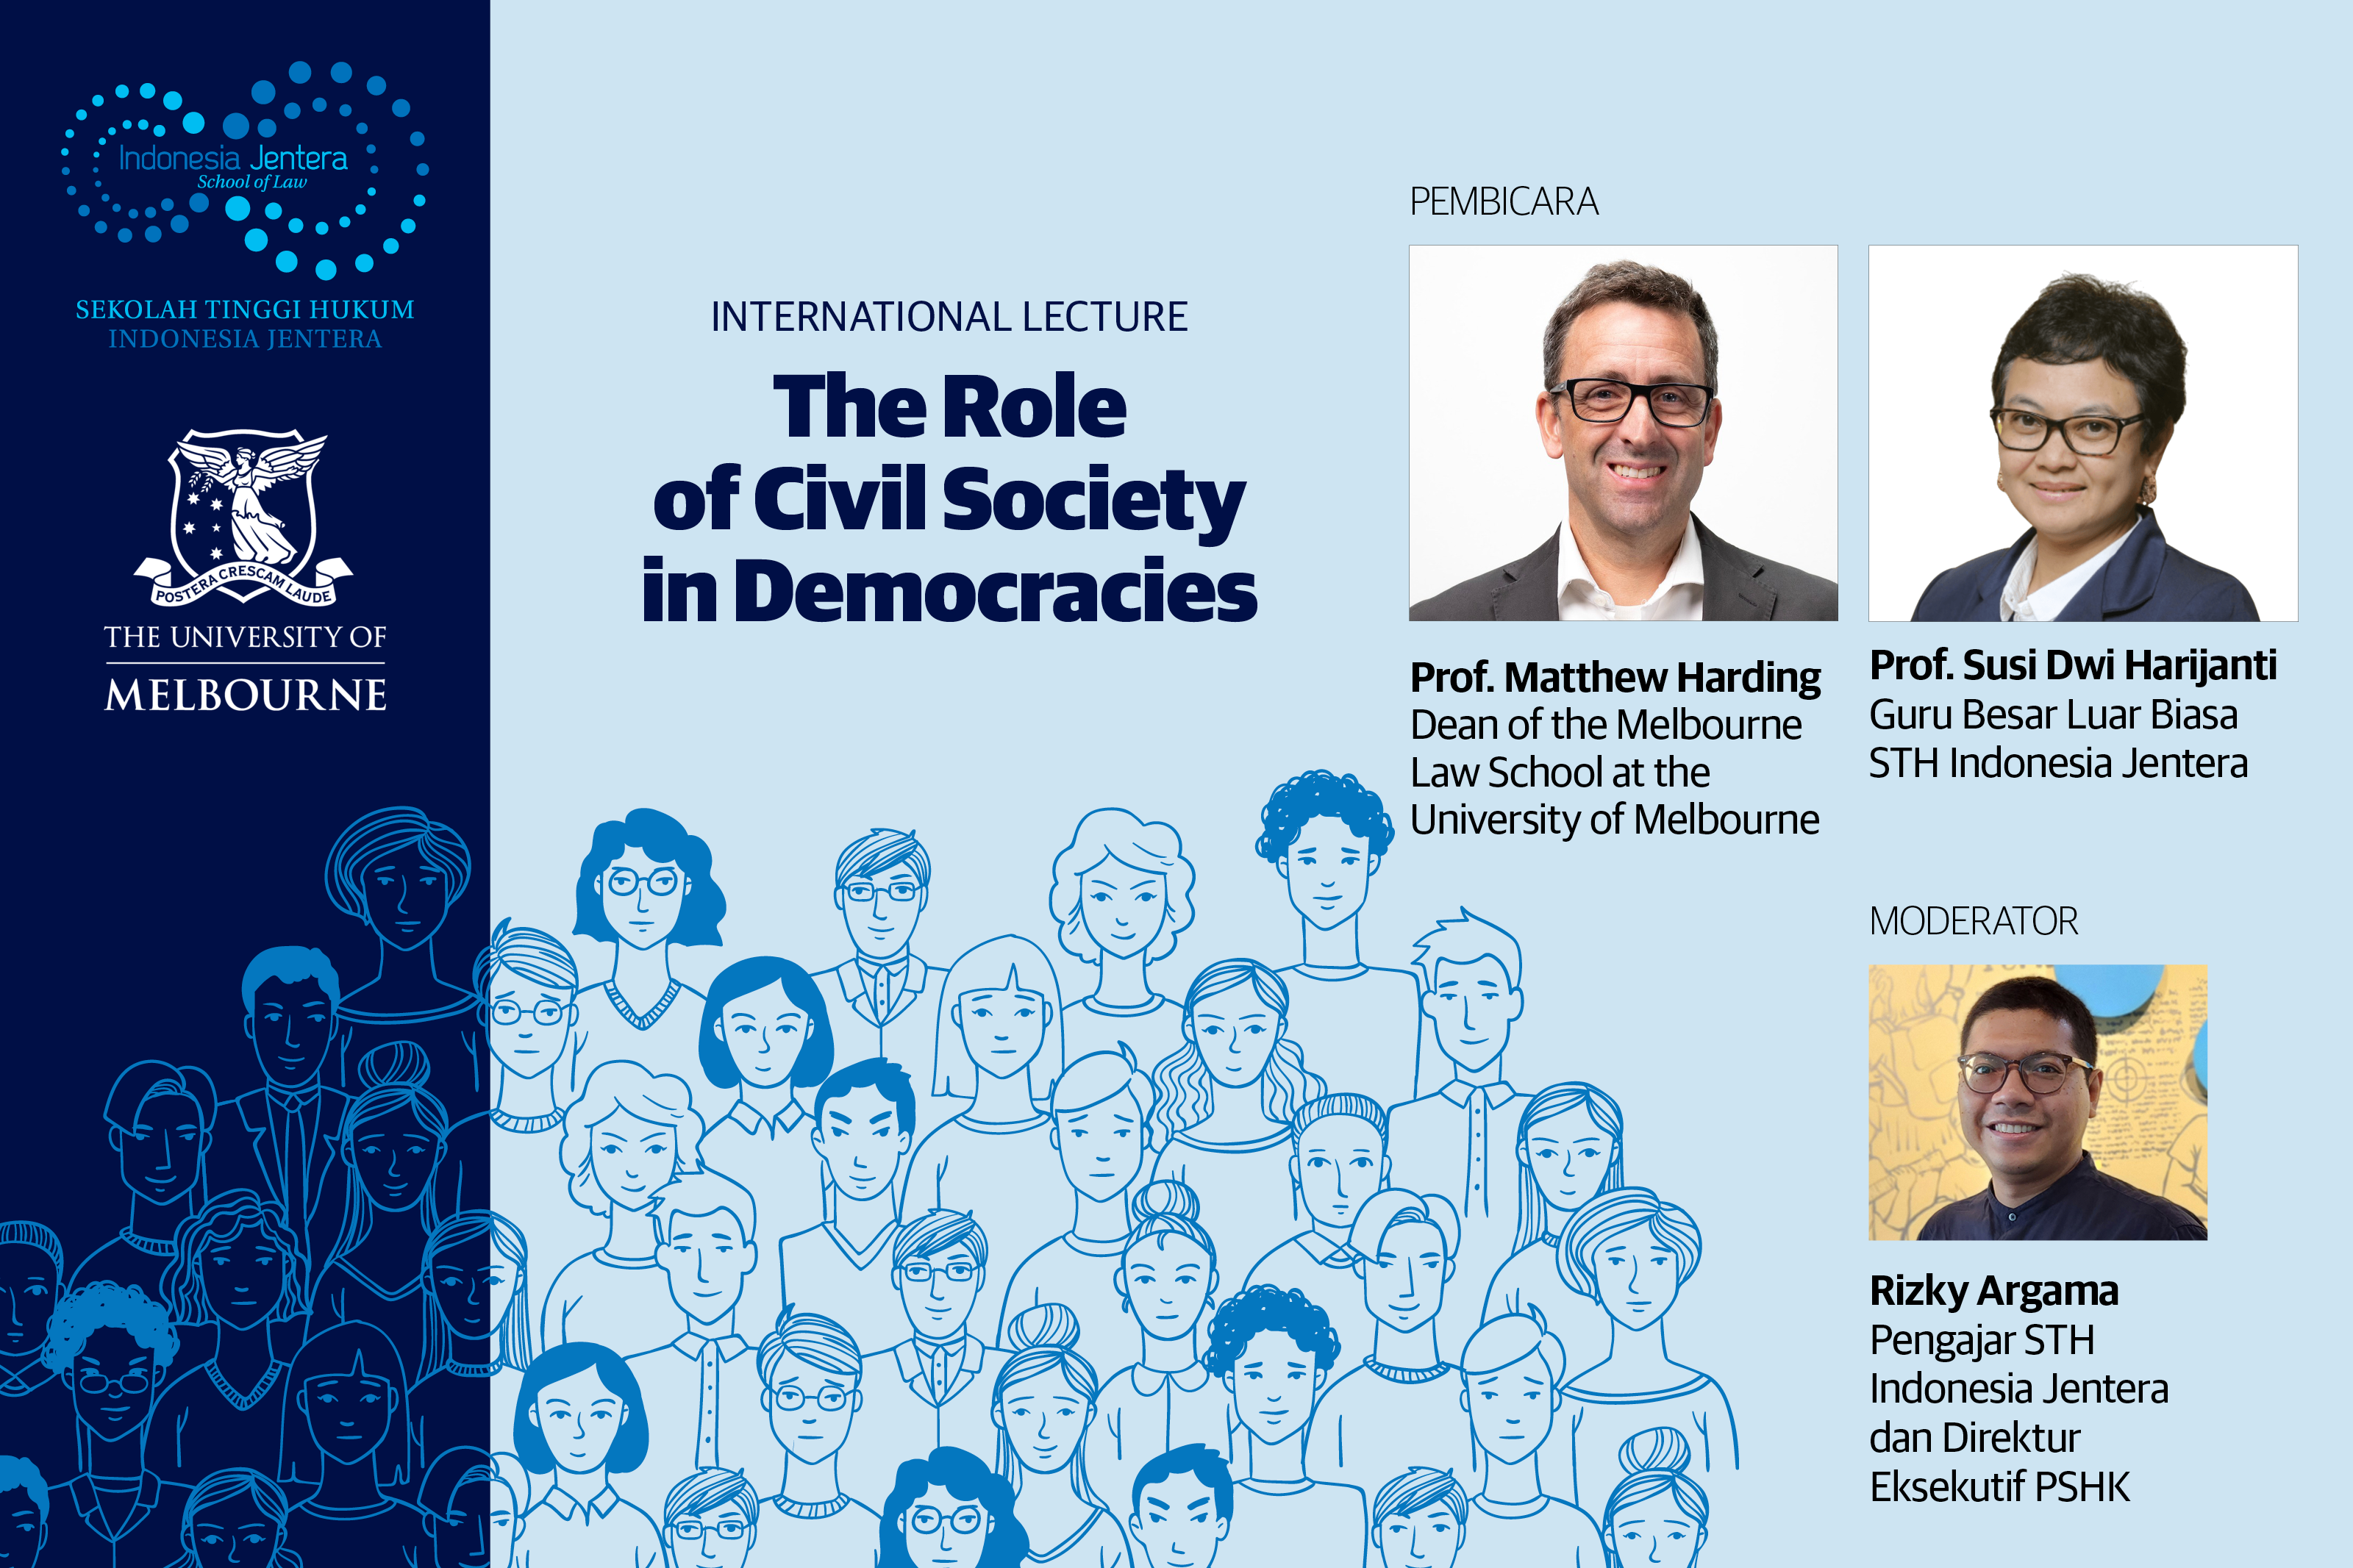 International Lecture The Role of Civil Society in Democracies